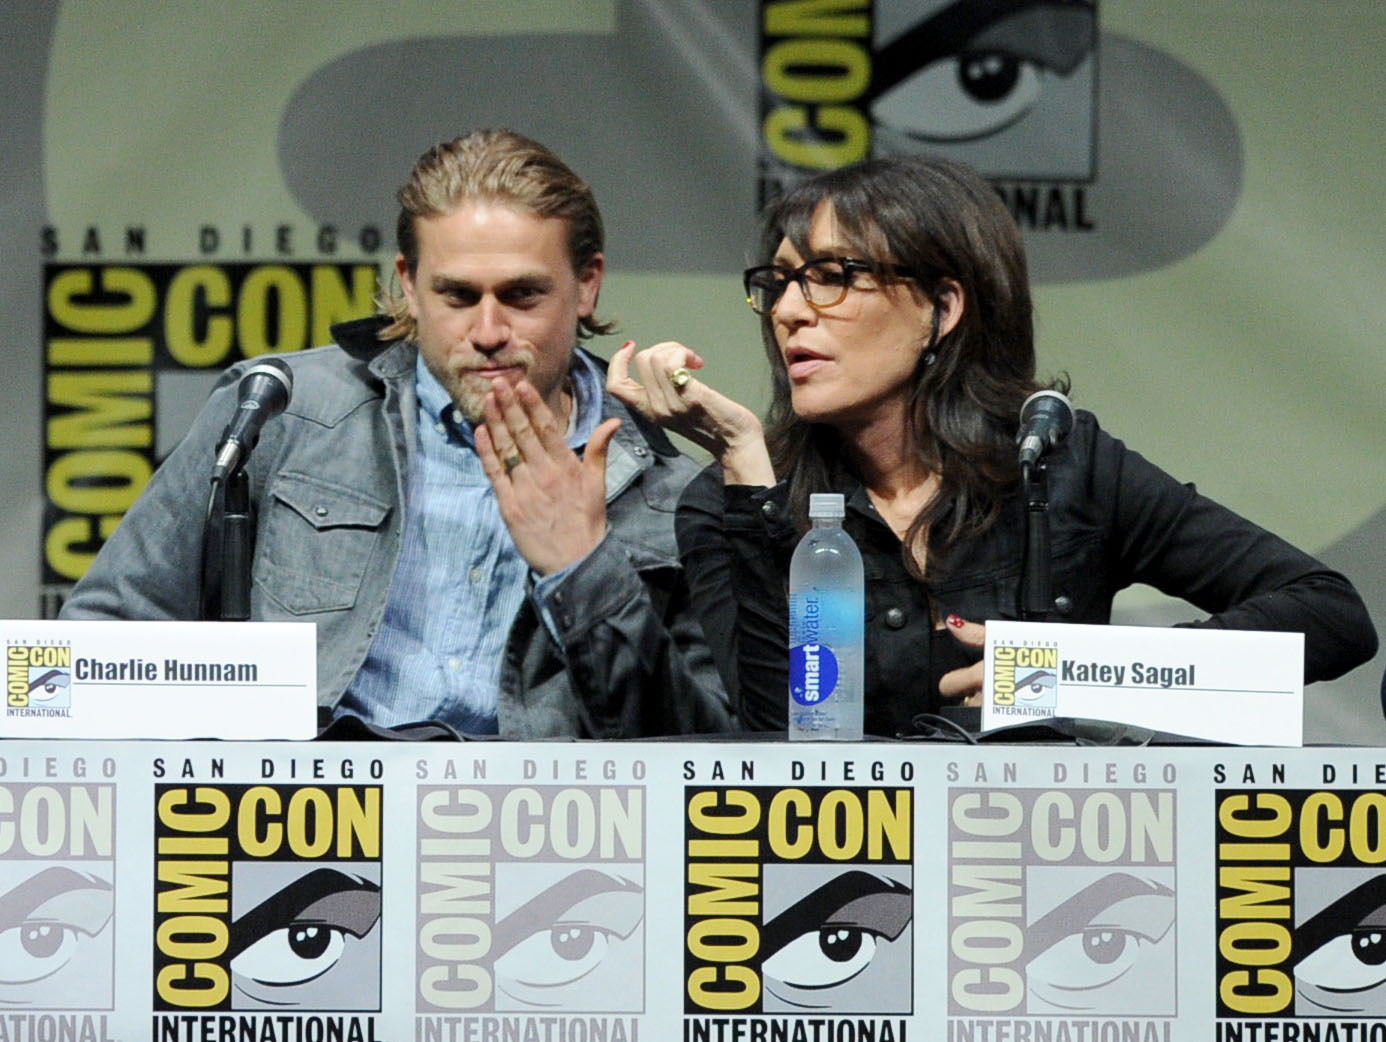 Katey Sagal and Charlie Hunnam at event of Sons of Anarchy (2008)